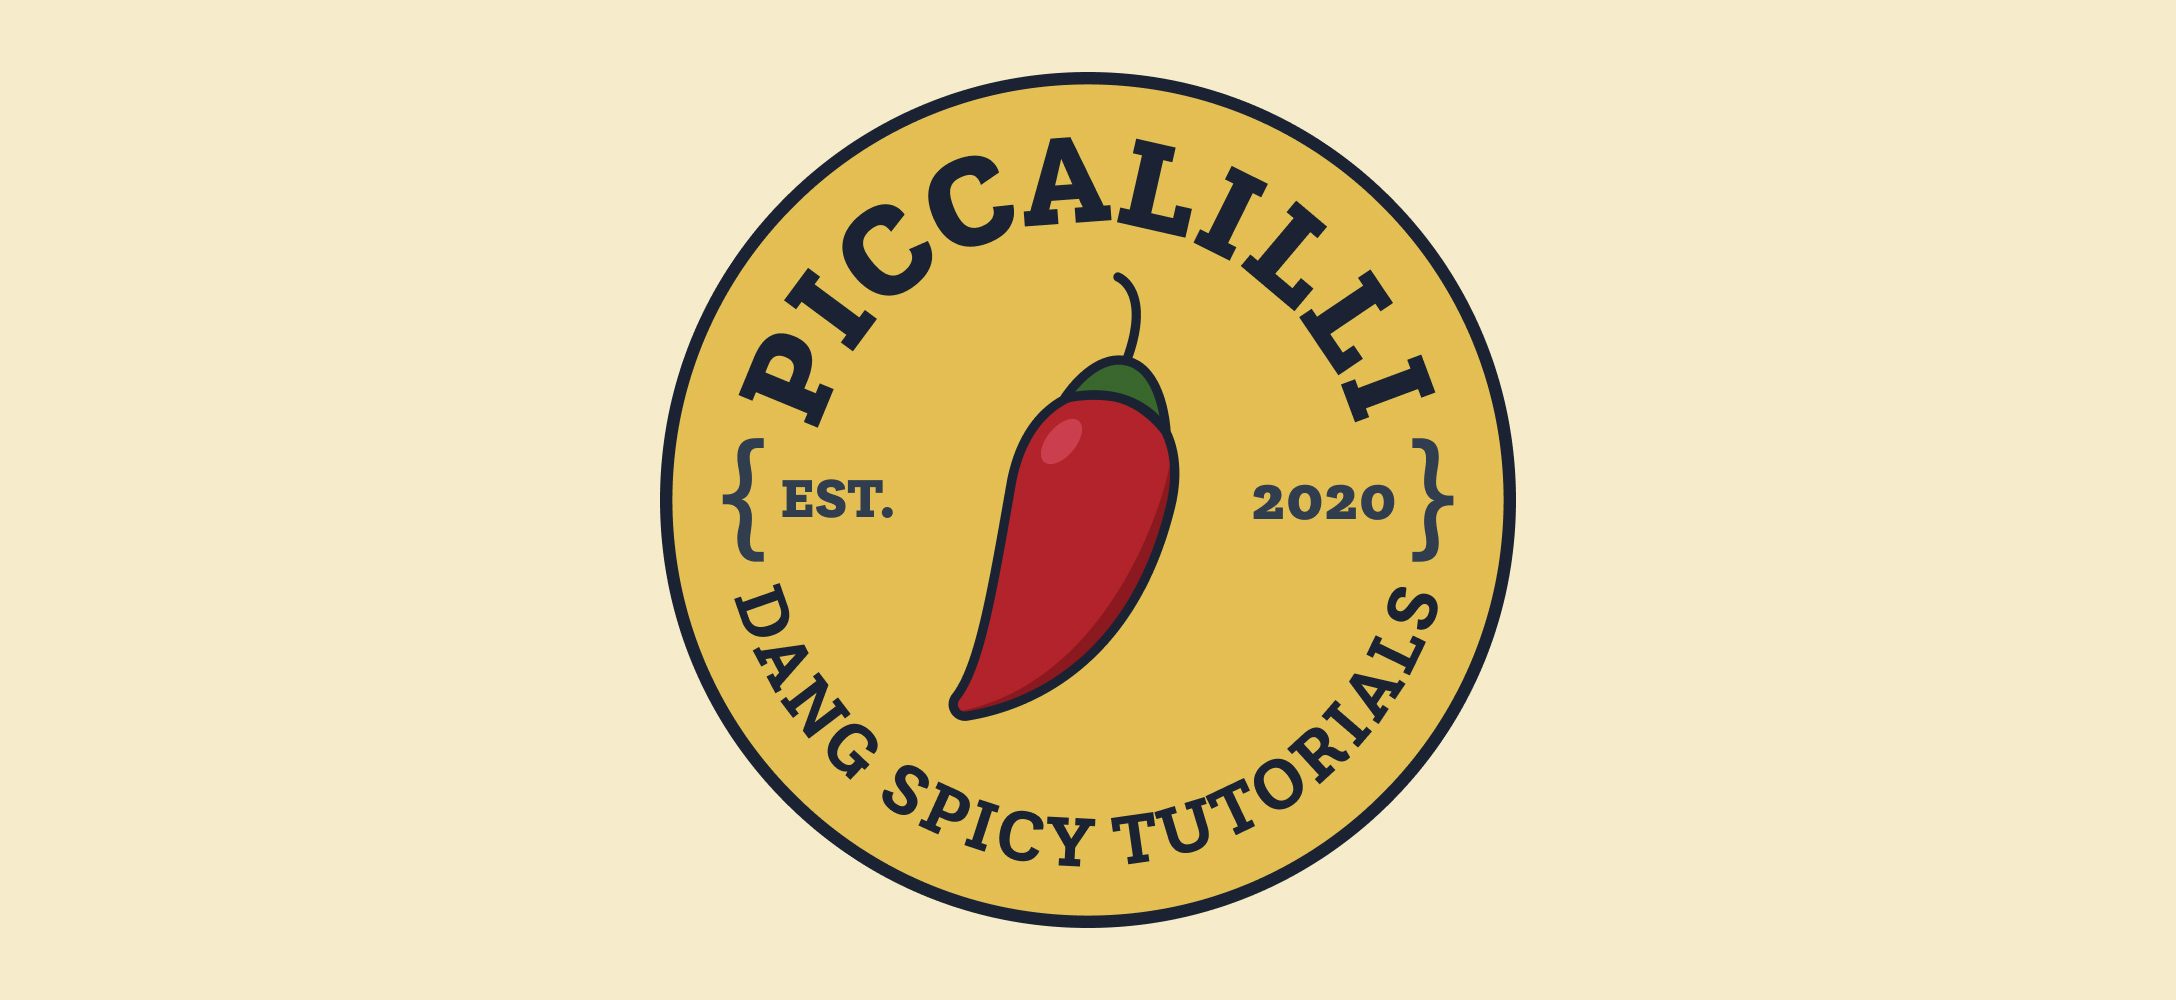 The Piccalilli logo, which is a badge with “Piccalilli - Dang Spicy Tutorials” written around the edges with a red chilli in the middle